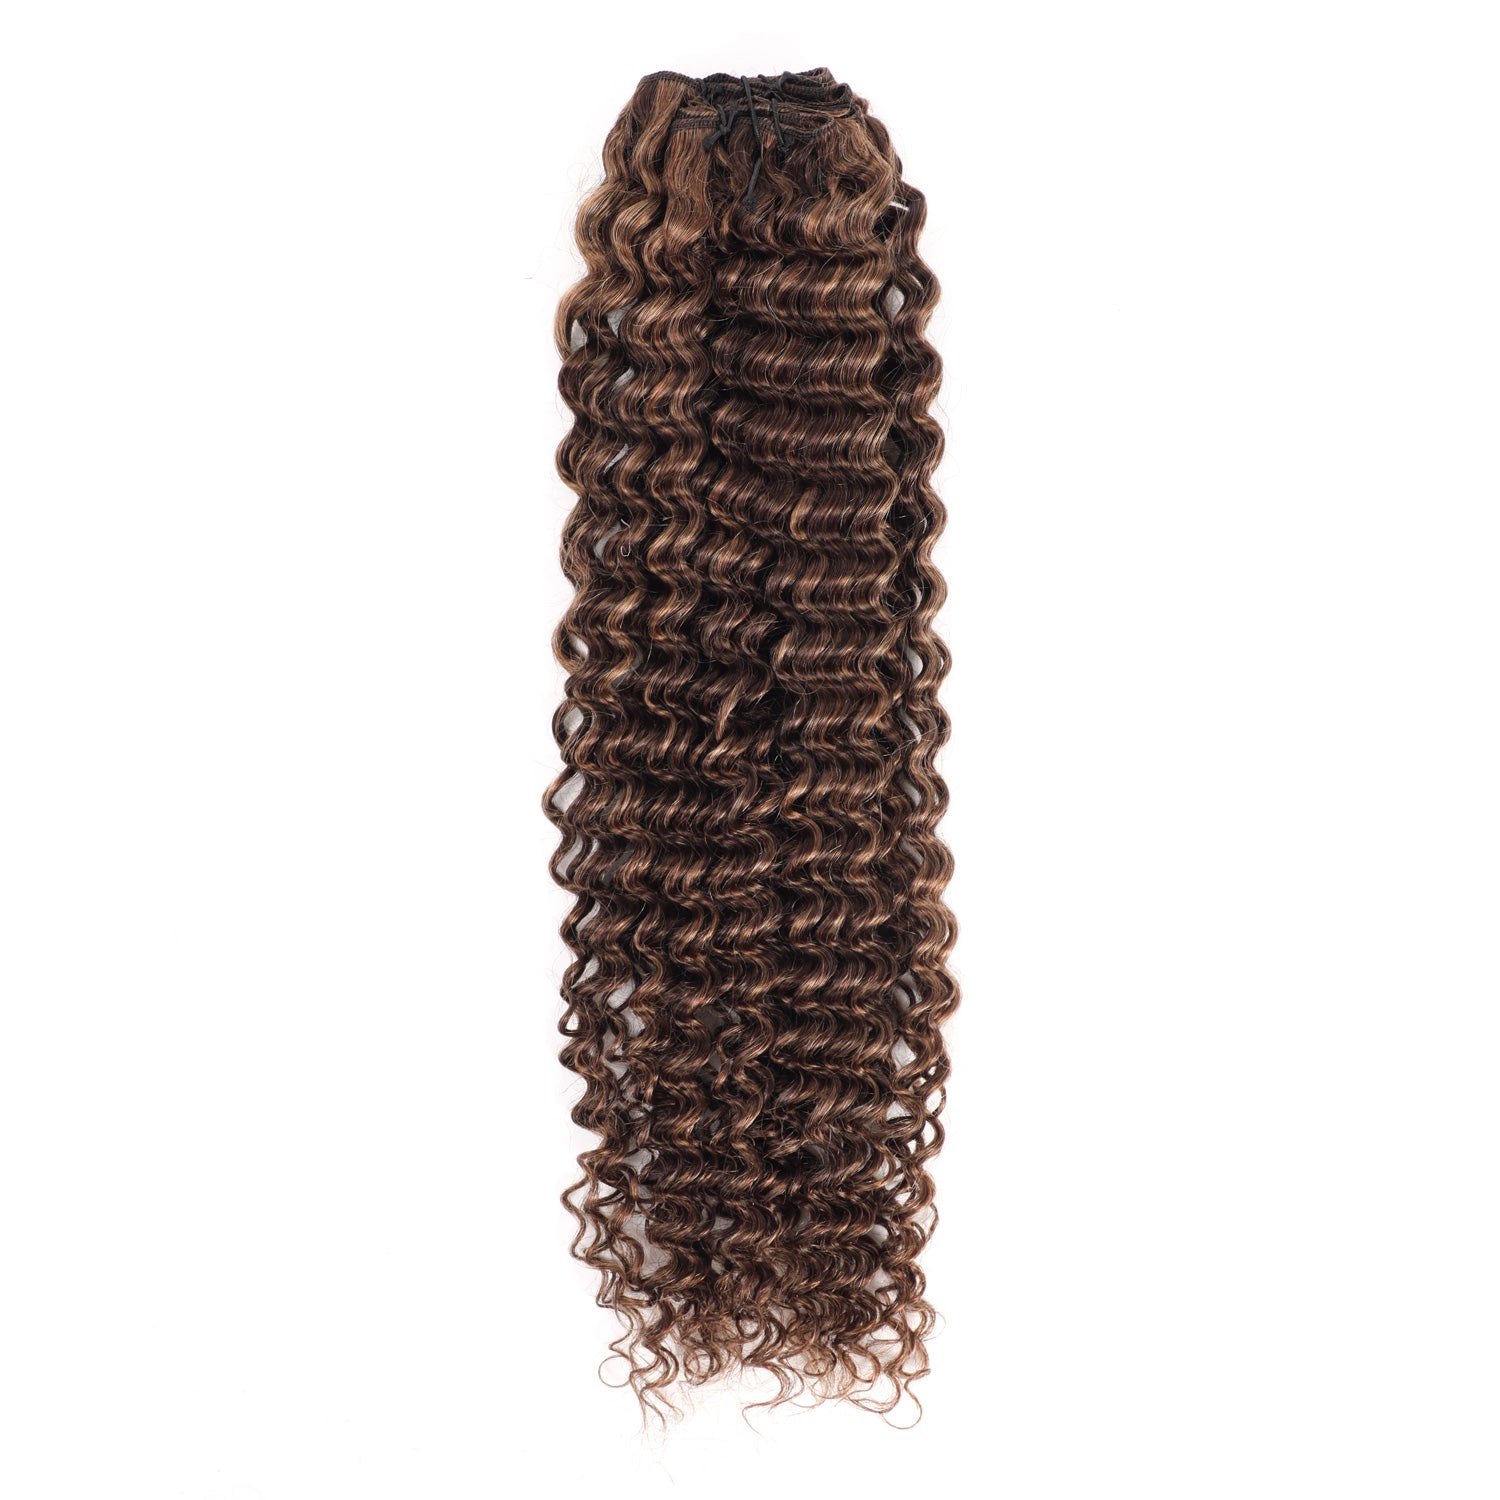 CUrly Human Hair Extensions